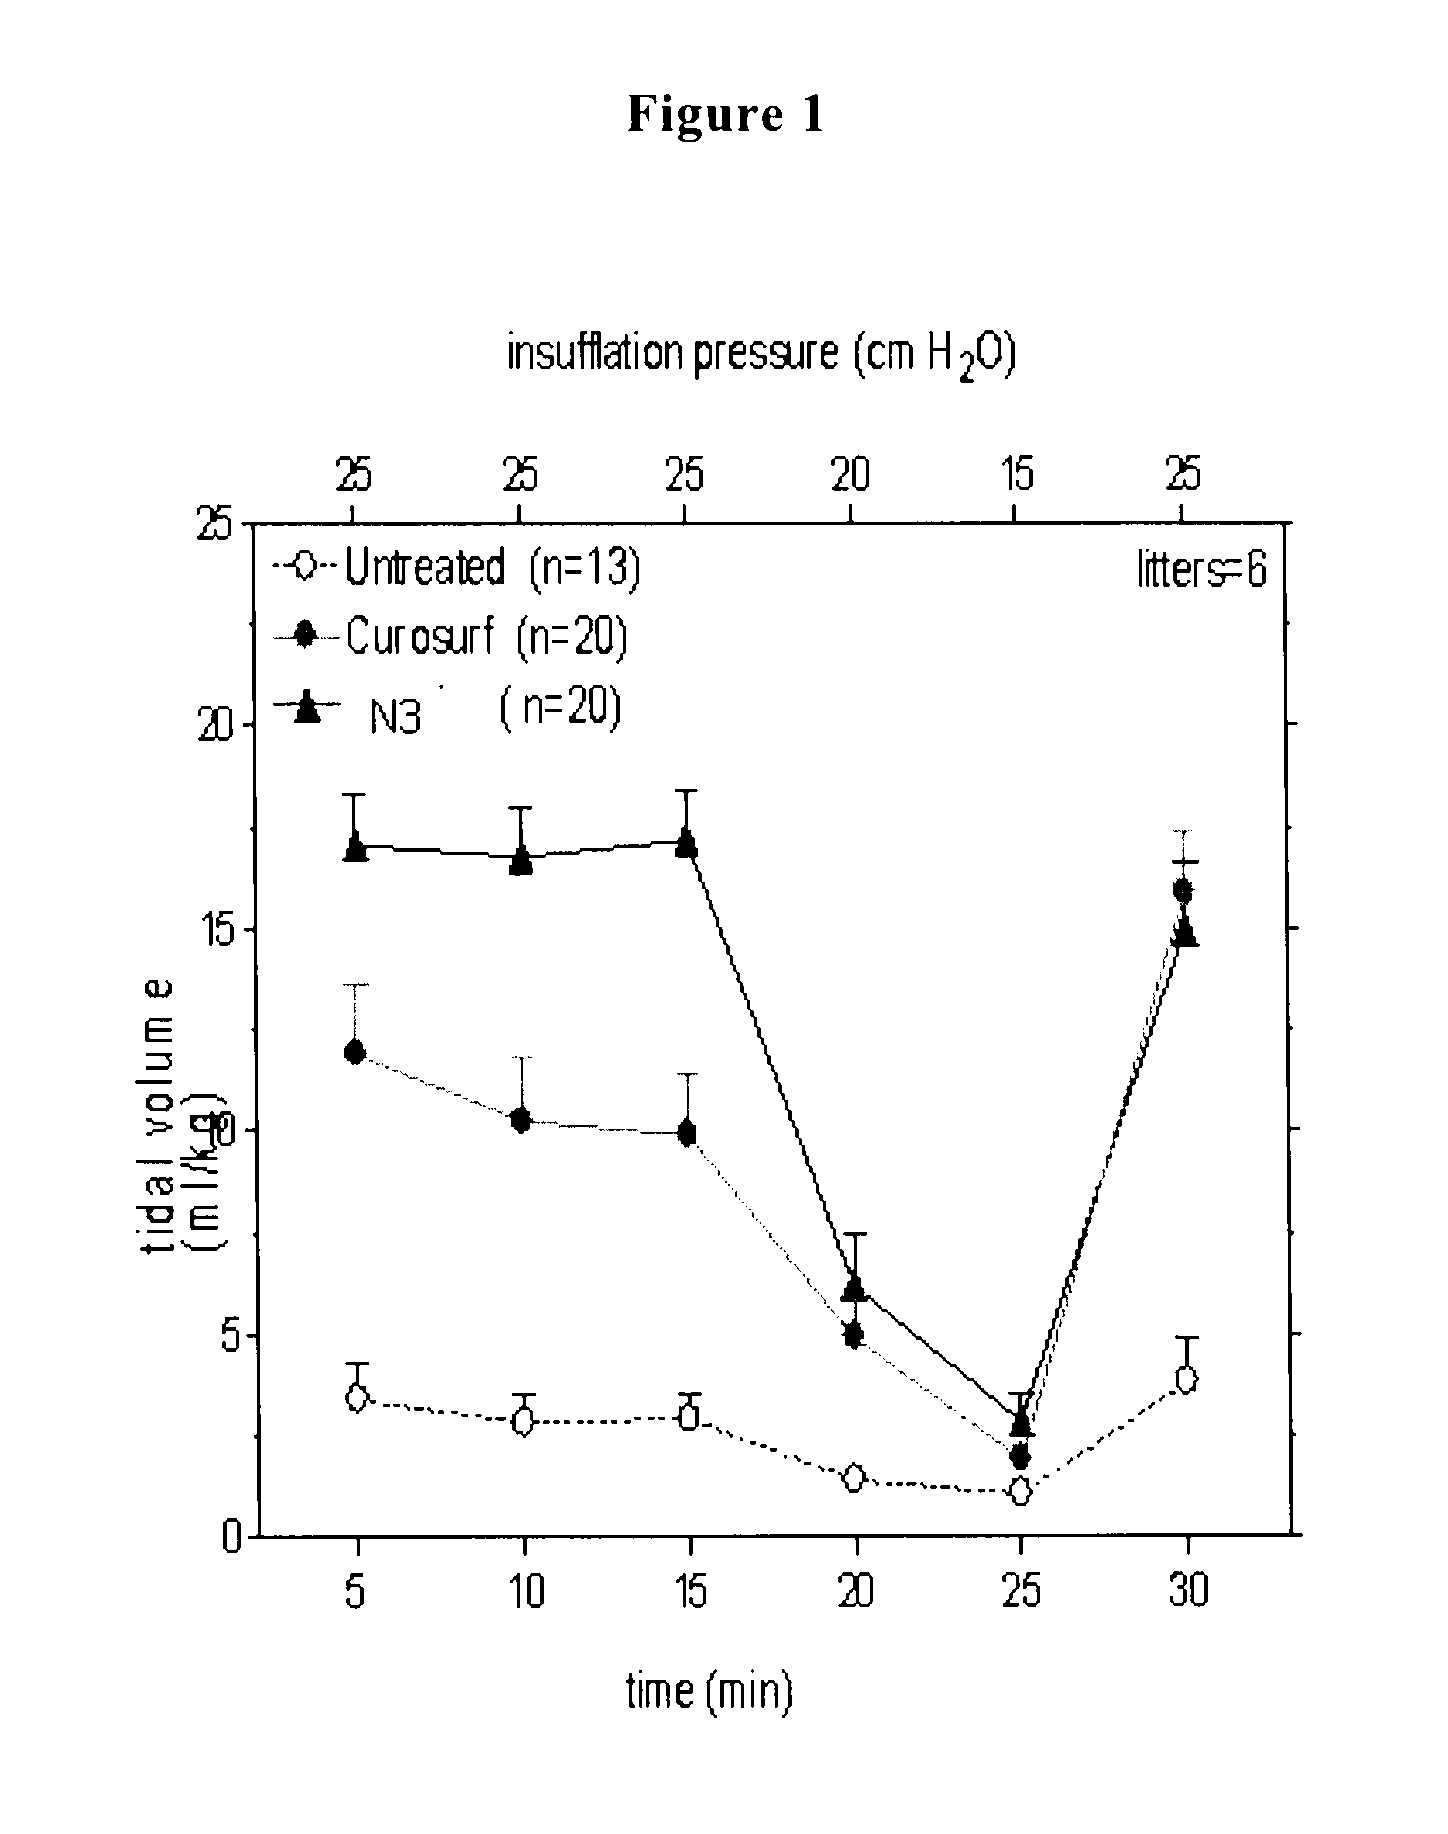 Reconstituted surfactant composition containing analogs of surfactant protein b (sp-b) and surfactant protein c (sp-c)